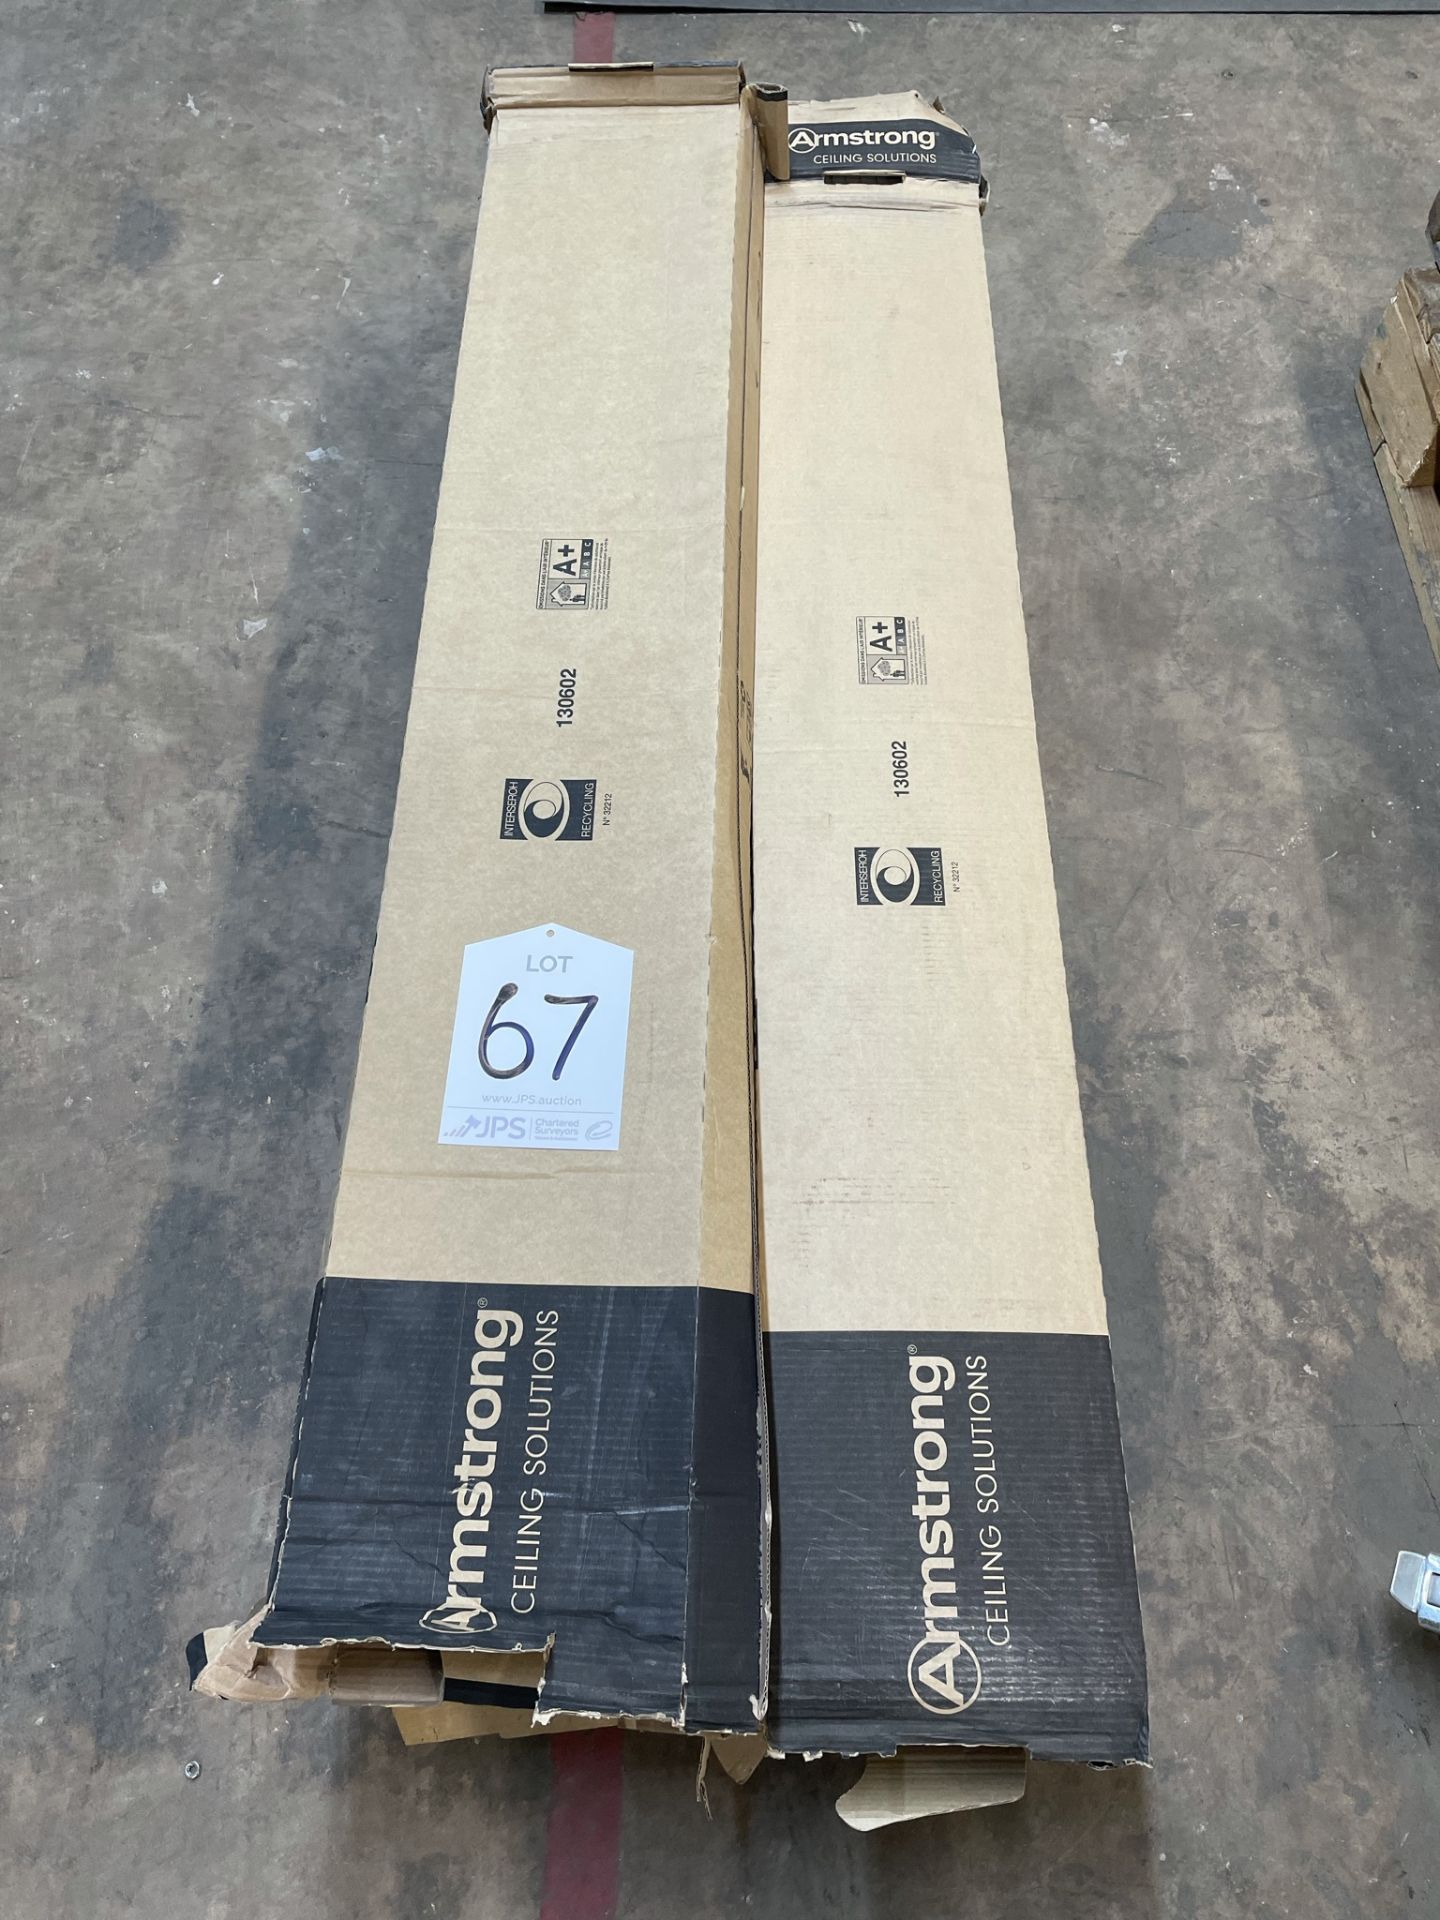 7 x Boxes of Armstrong Prelude 24 XL Ceiling Grid Cross Joiners | 1200mm - Image 2 of 4